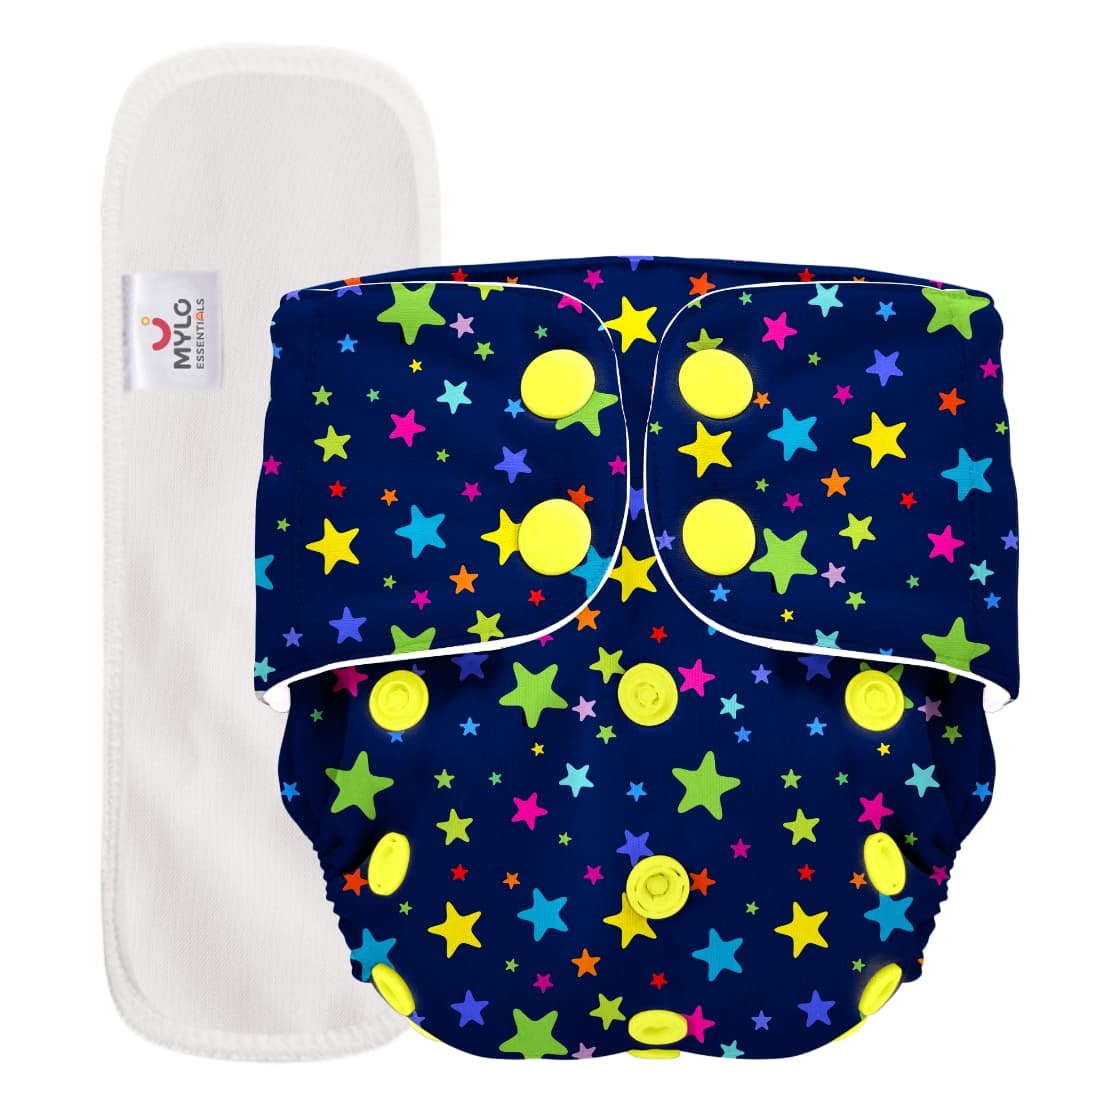 Mylo Adjustable Washable & Reusable Top lay Cloth Diaper with SmartCuff Technology for Enhanced Leak Protection-Comes with 1 Dry Feel Absorbent Insert Pad  (3M-3Y)- Twinkle Twinkle